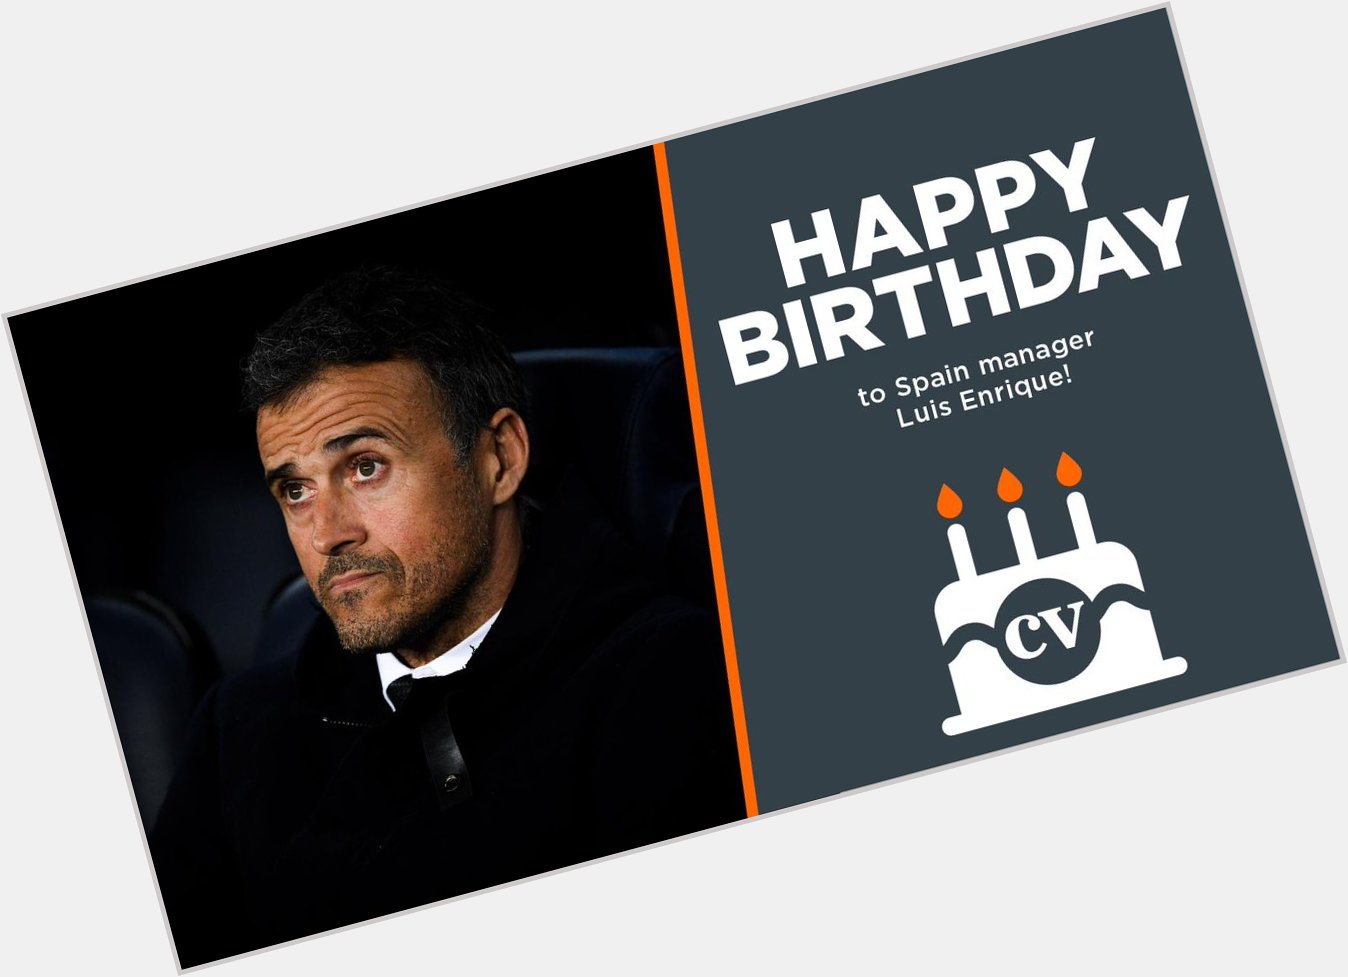  Happy birthday to Spain manager Luis Enrique! 